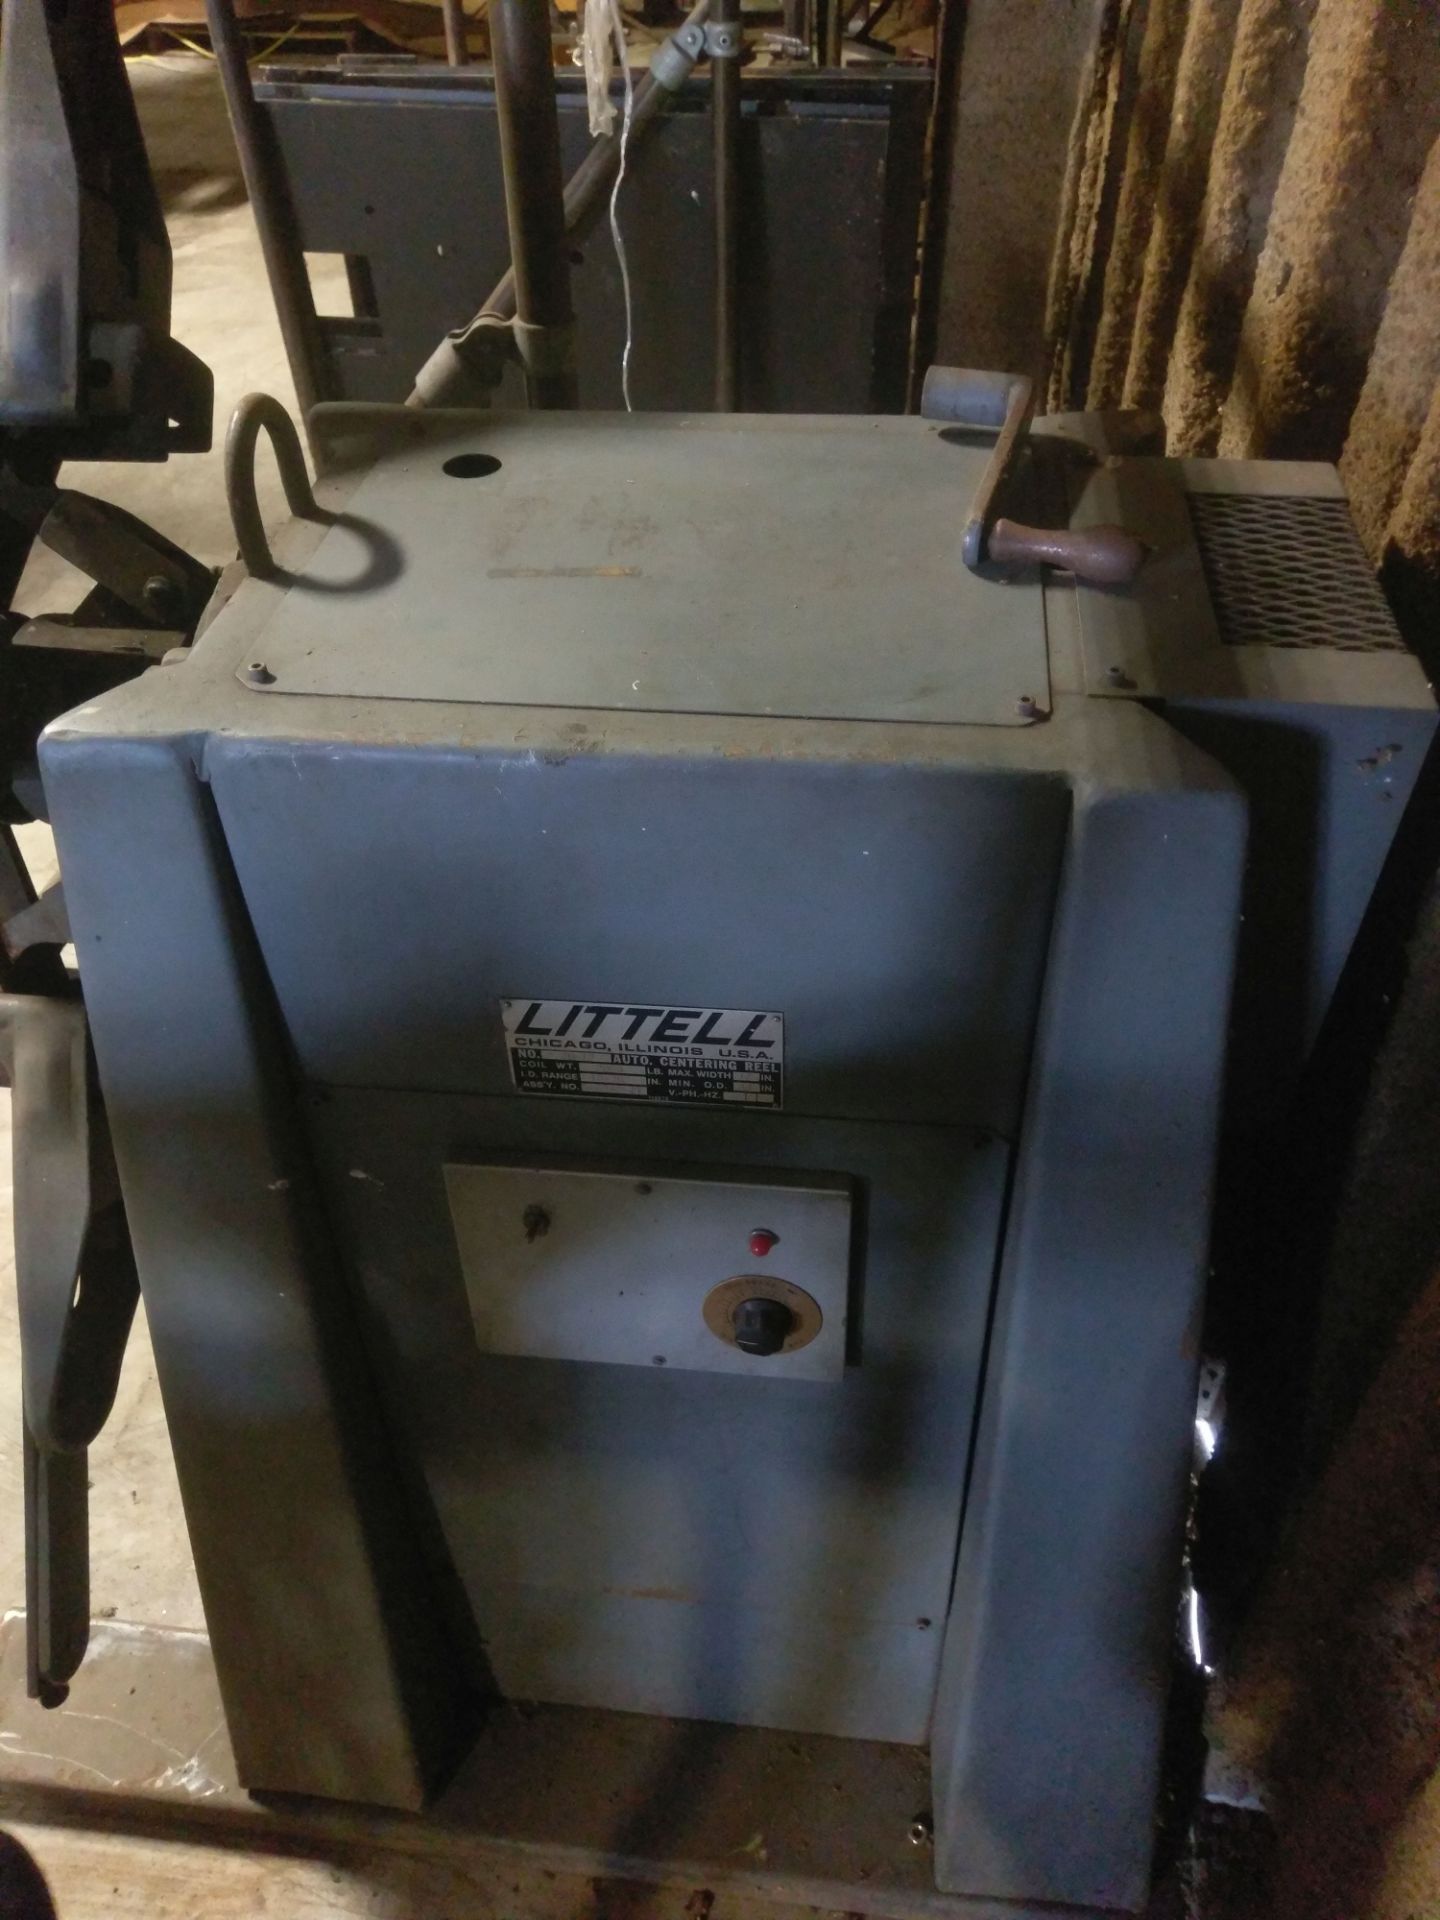 2,000 LB. LITTELL NO. 20-12 POWER CENTERING REEL; S/N S-6032-77, ID RANGE 16 TO 20, 12" MAX COIL - Image 6 of 6